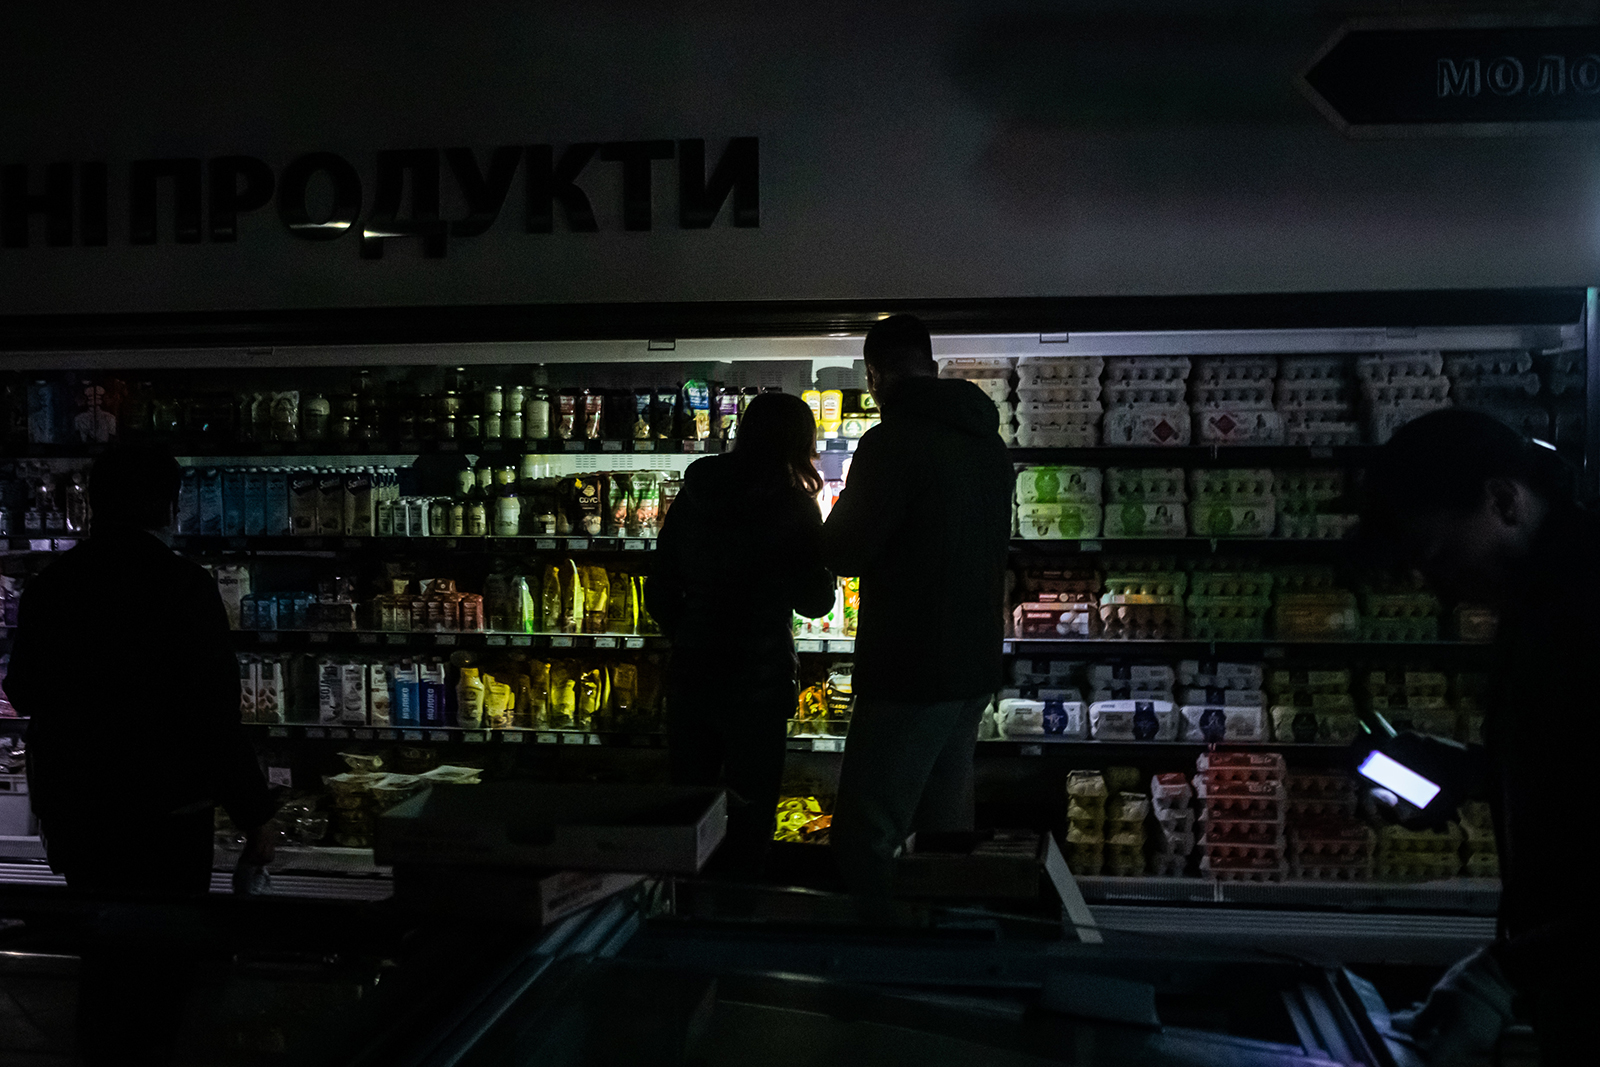 Ukraine schedules further power outages Monday